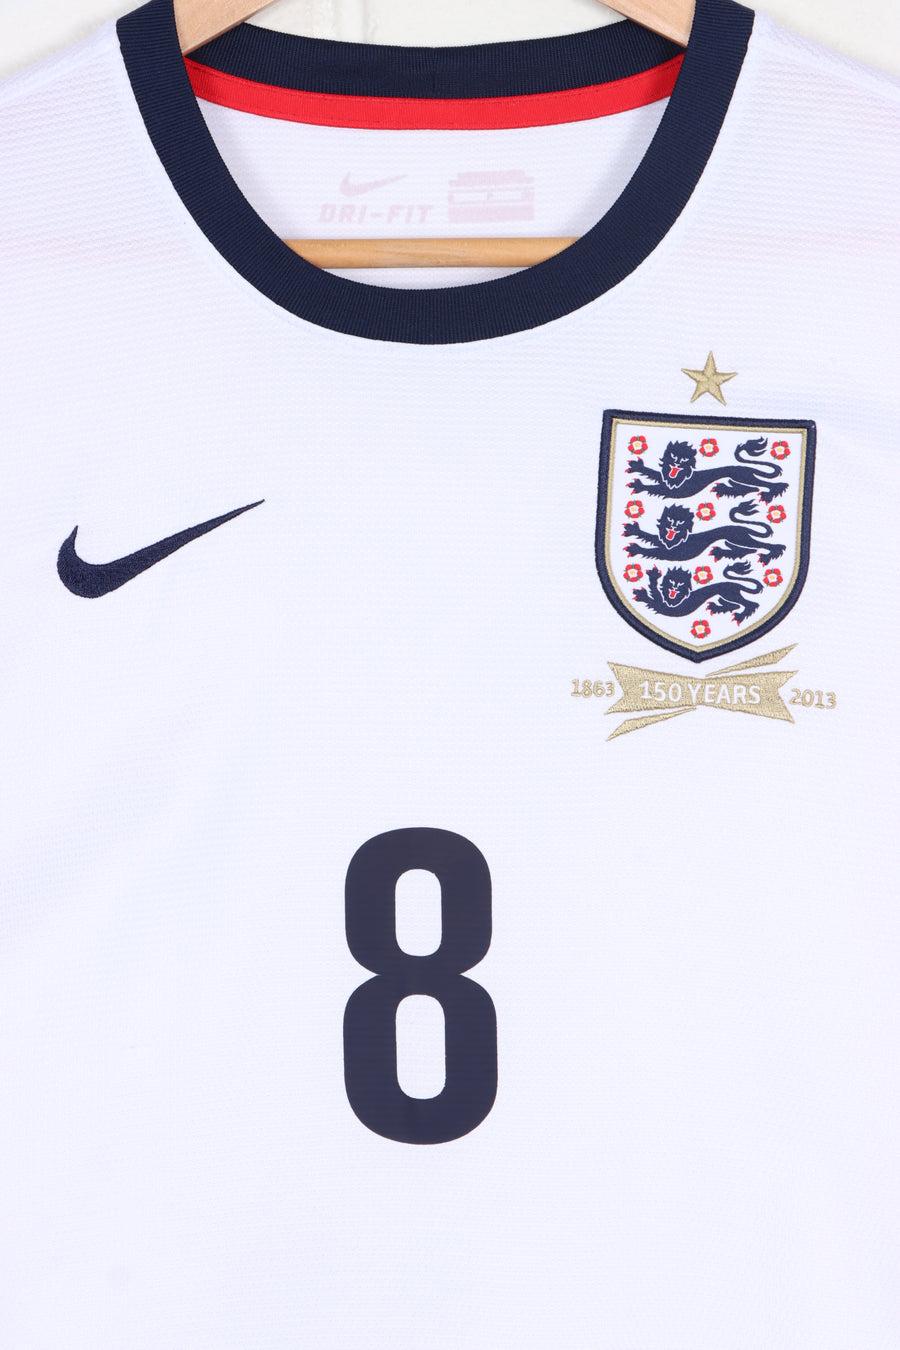 England #8 Wilshere 2013/2014 '150 Years' NIKE Home Soccer Jersey (S)